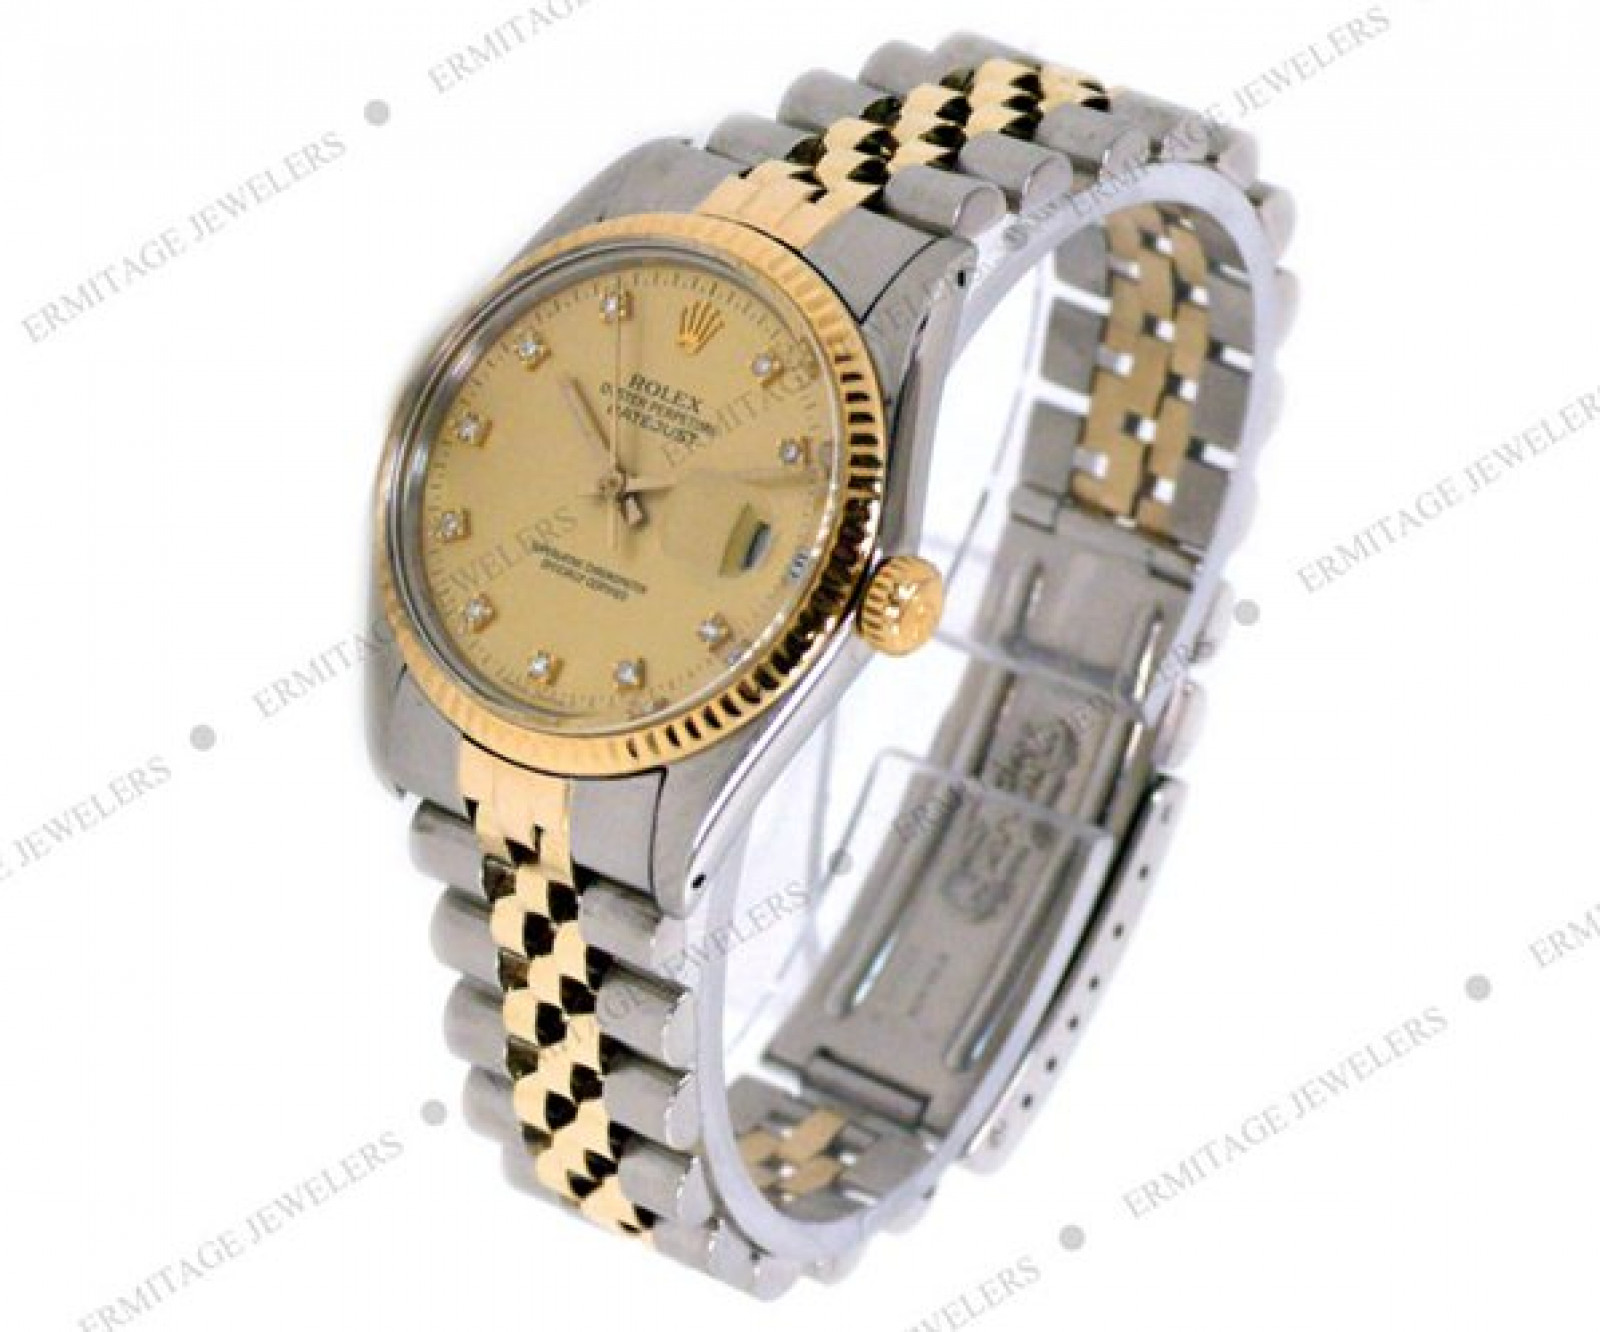 Pre-Owned Two Tone Rolex Datejust 16013 with Diamonds